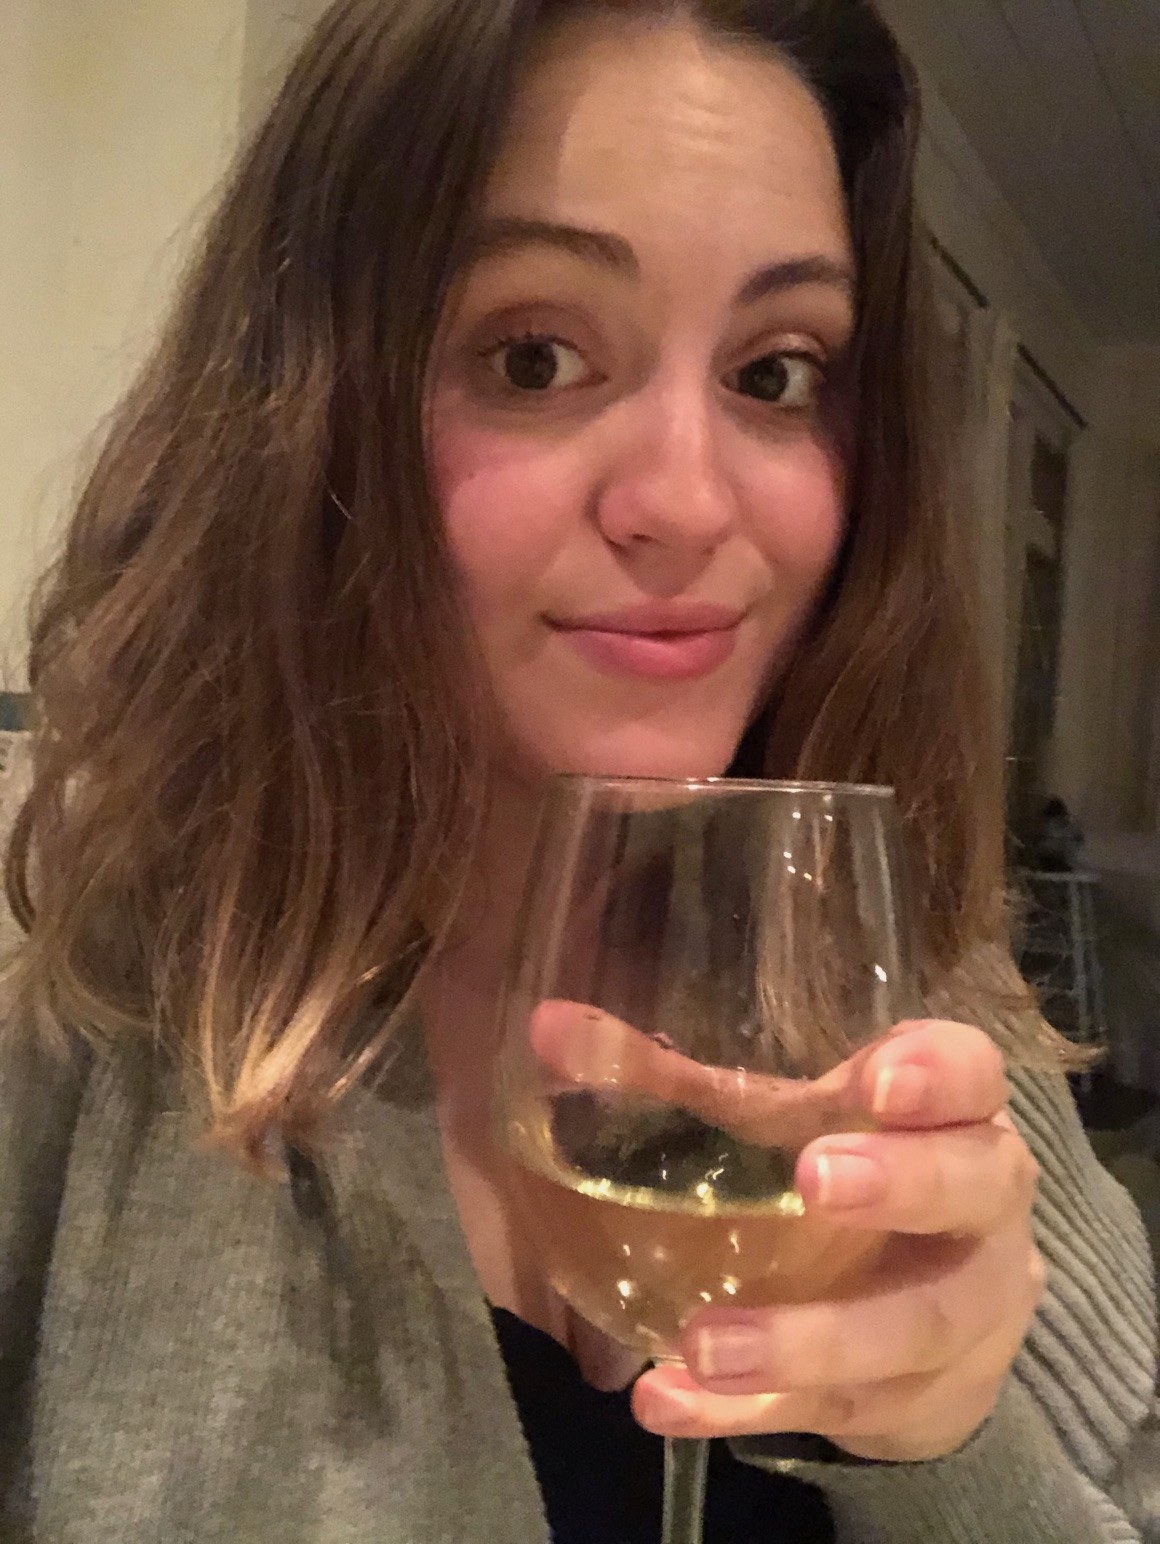 Woman holding a wine glass